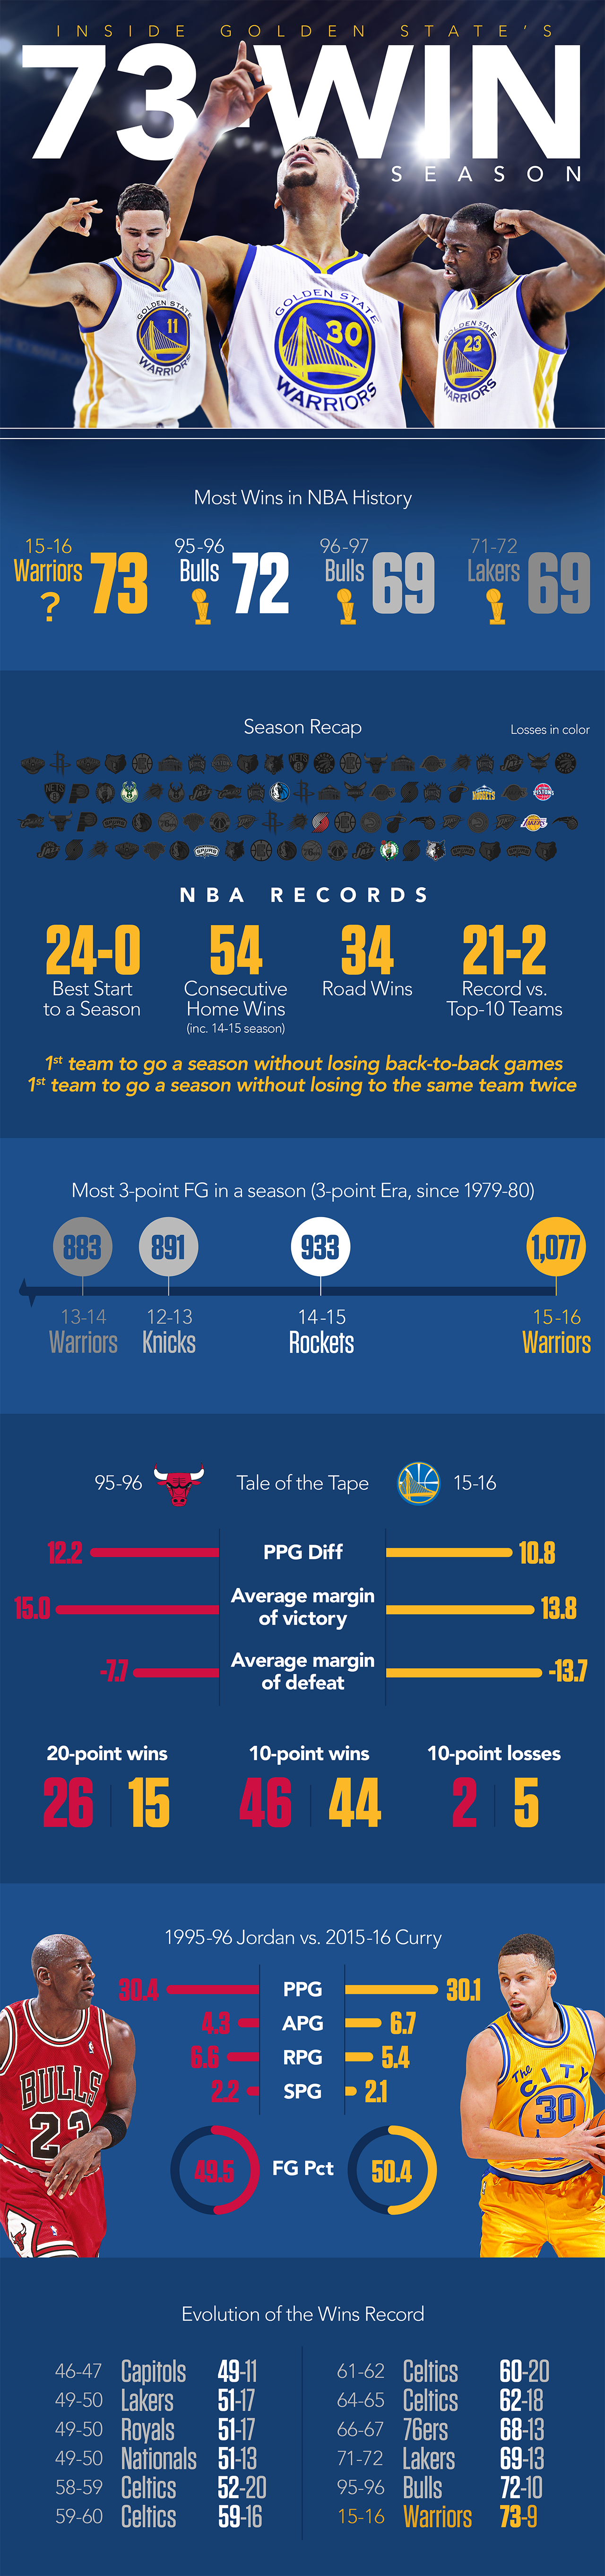 Golden State Warriors Scores, Stats and Highlights - ESPN